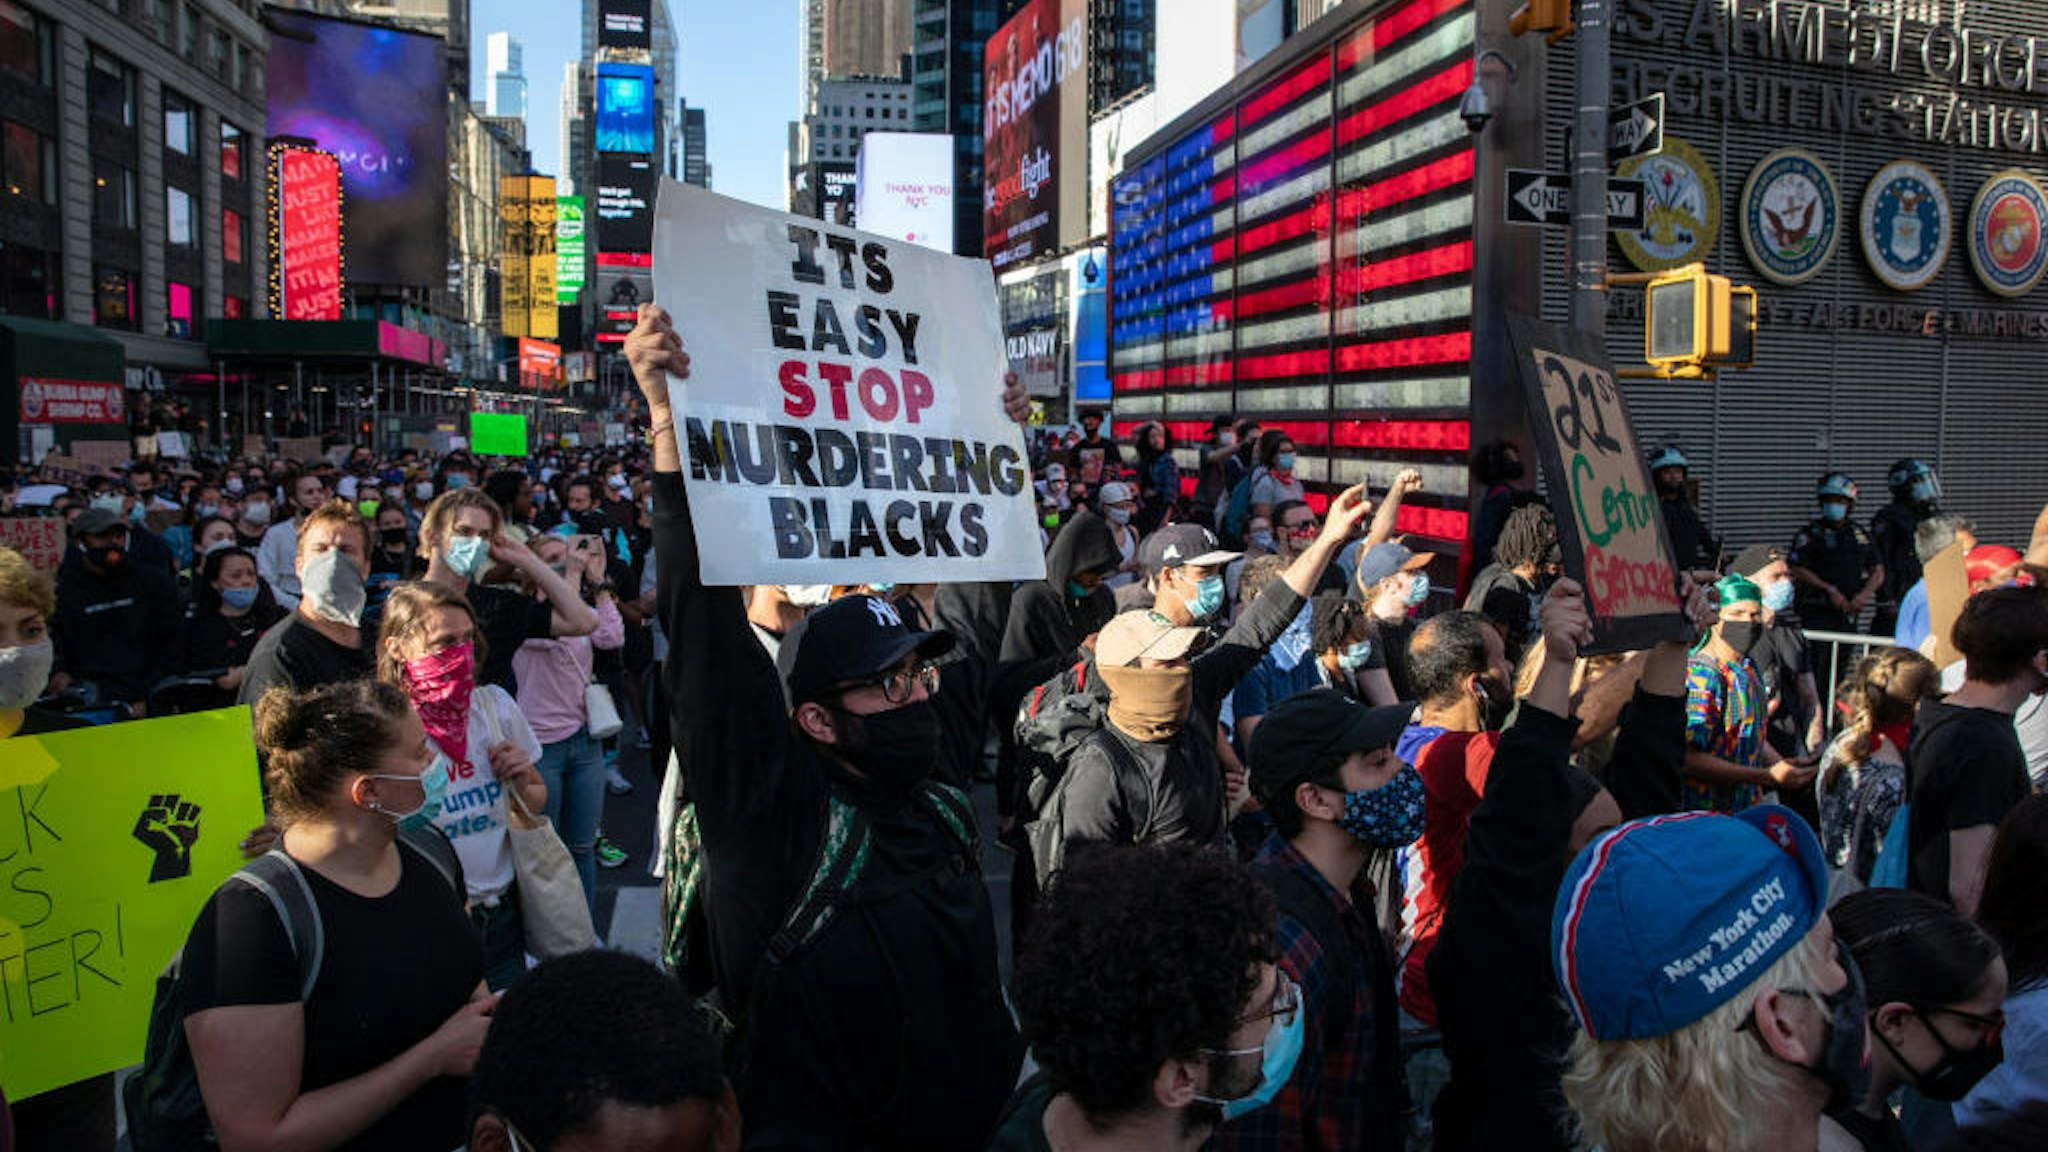 Black Lives Matter protesters kneel in Times Square during a march to honor George Floyd in Midtown Manhattan on May 31, 2020 in New York City. Protesters demonstrated for the fourth straight night after video emerged of a Minneapolis police officer, Derek Chauvin, pinning George Floyd's neck to the ground. Floyd was later pronounced dead while in police custody after being transported to Hennepin County Medical Center. The four officers involved have been fired and Chauvin has been arrested and charged with 3rd degree murder. (Photo by John Moore/Getty Images)